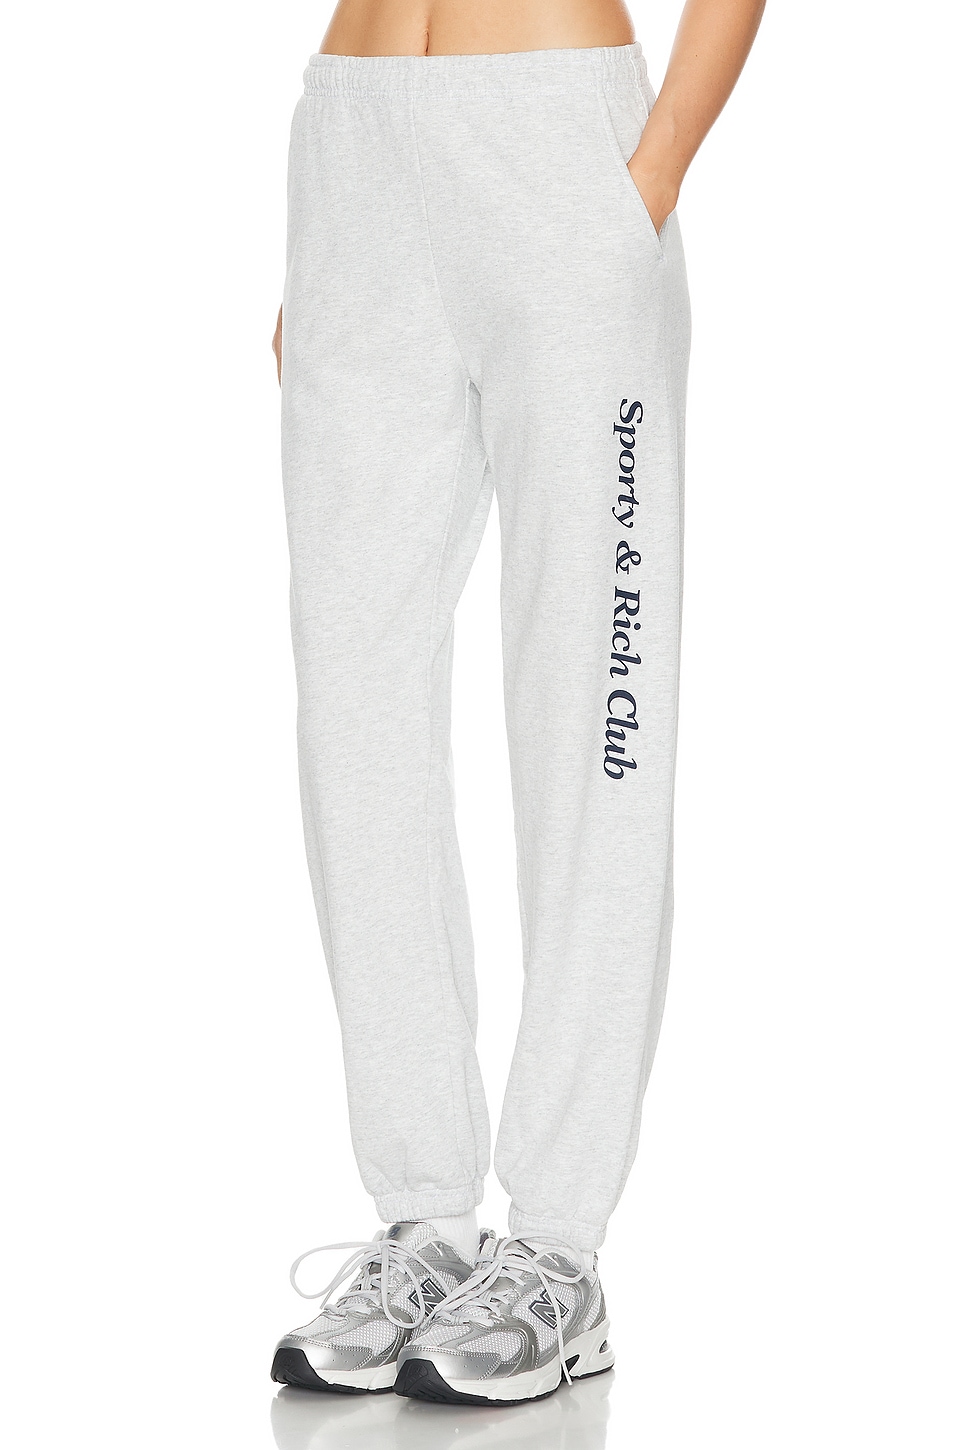 Image 1 of Sporty & Rich Starter Sweatpant in Heather Grey & Navy